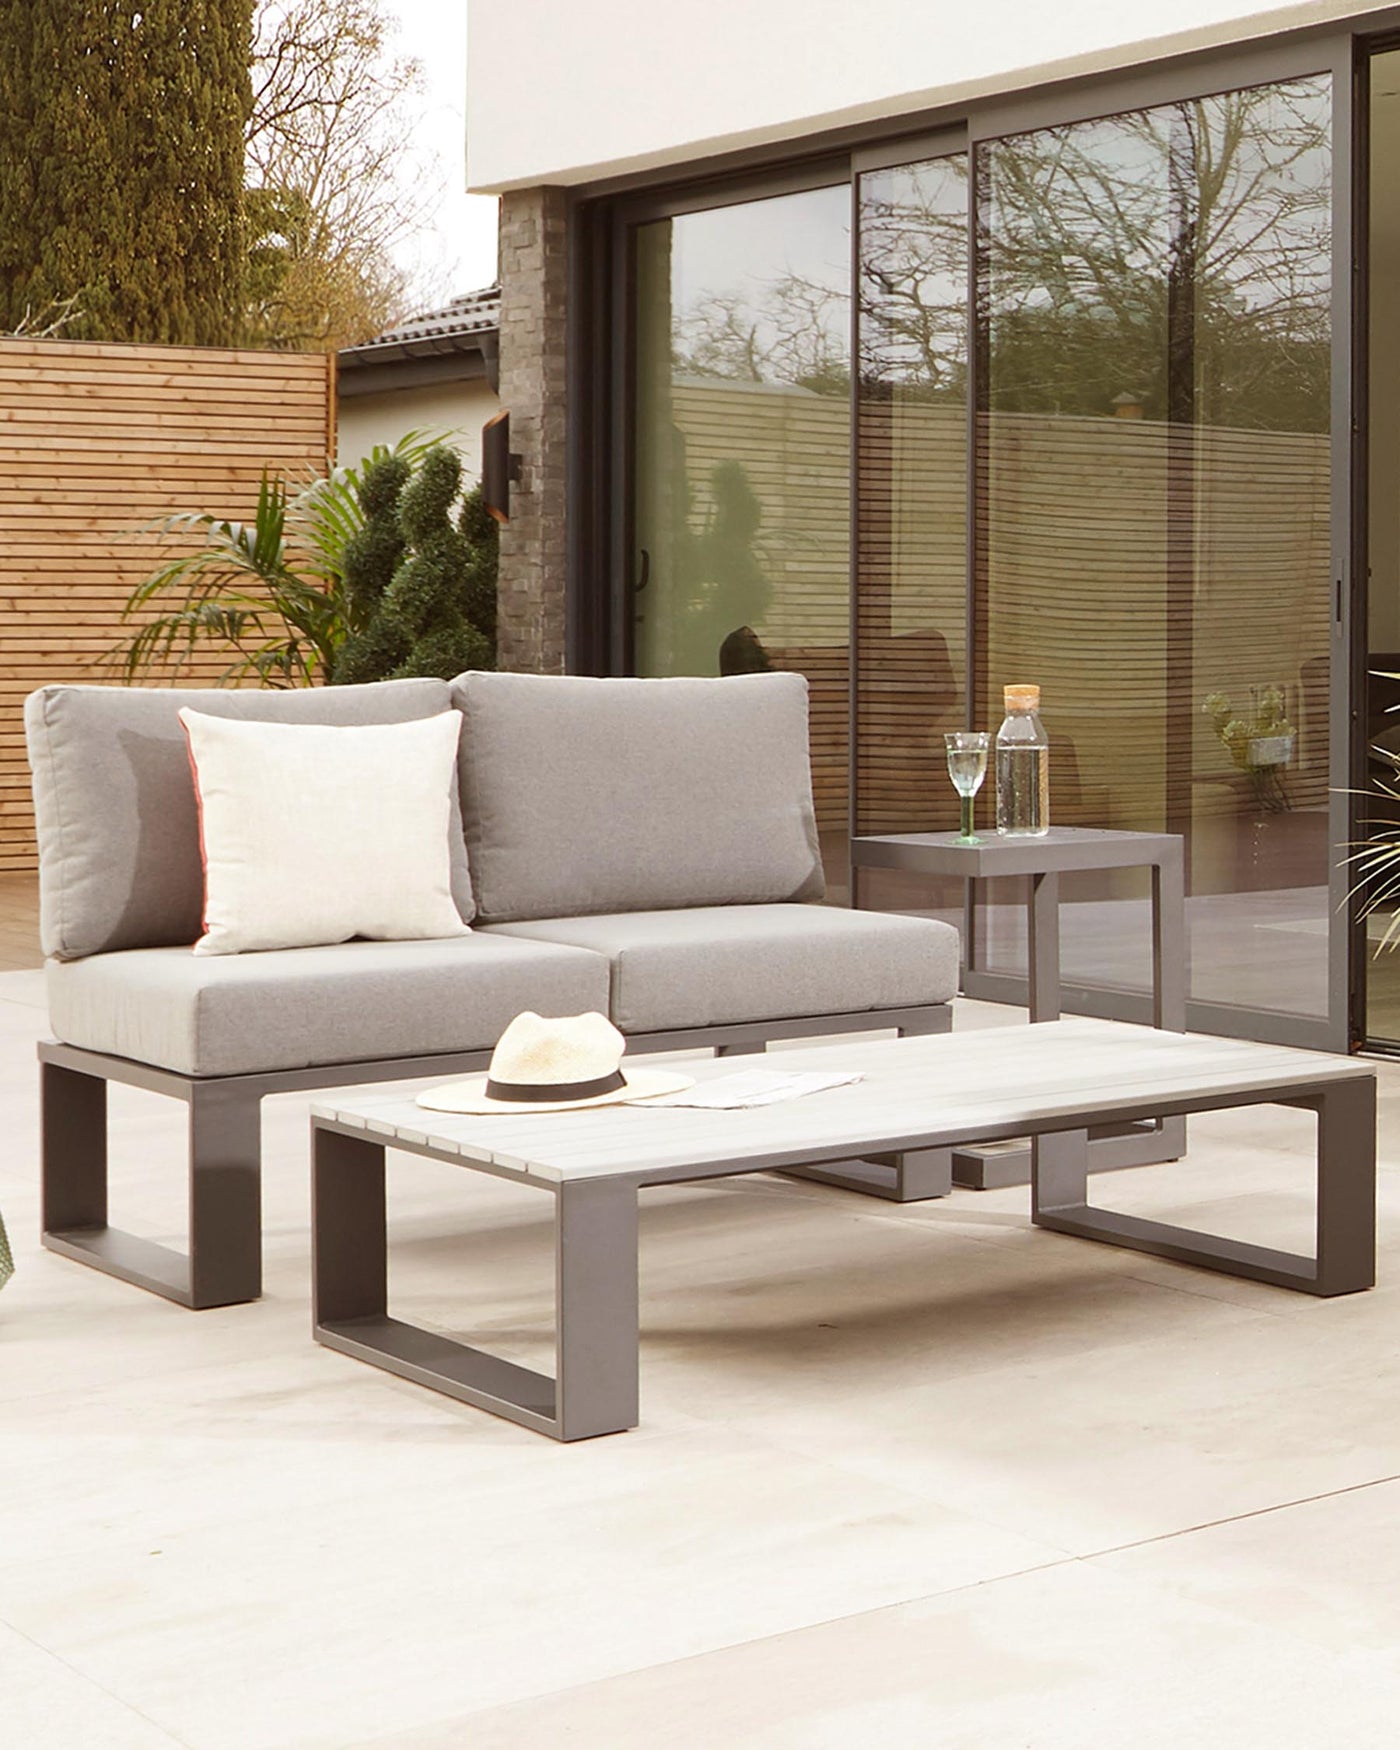 Modern outdoor furniture set featuring a grey, two-seater sofa with clean lines and plush cushions, accompanied by a low-profile, rectangular coffee table with a sleek grey finish. A matching side table with a clear glass top completes the set. All pieces have a contemporary metal frame design, suitable for elegant patio or garden spaces.